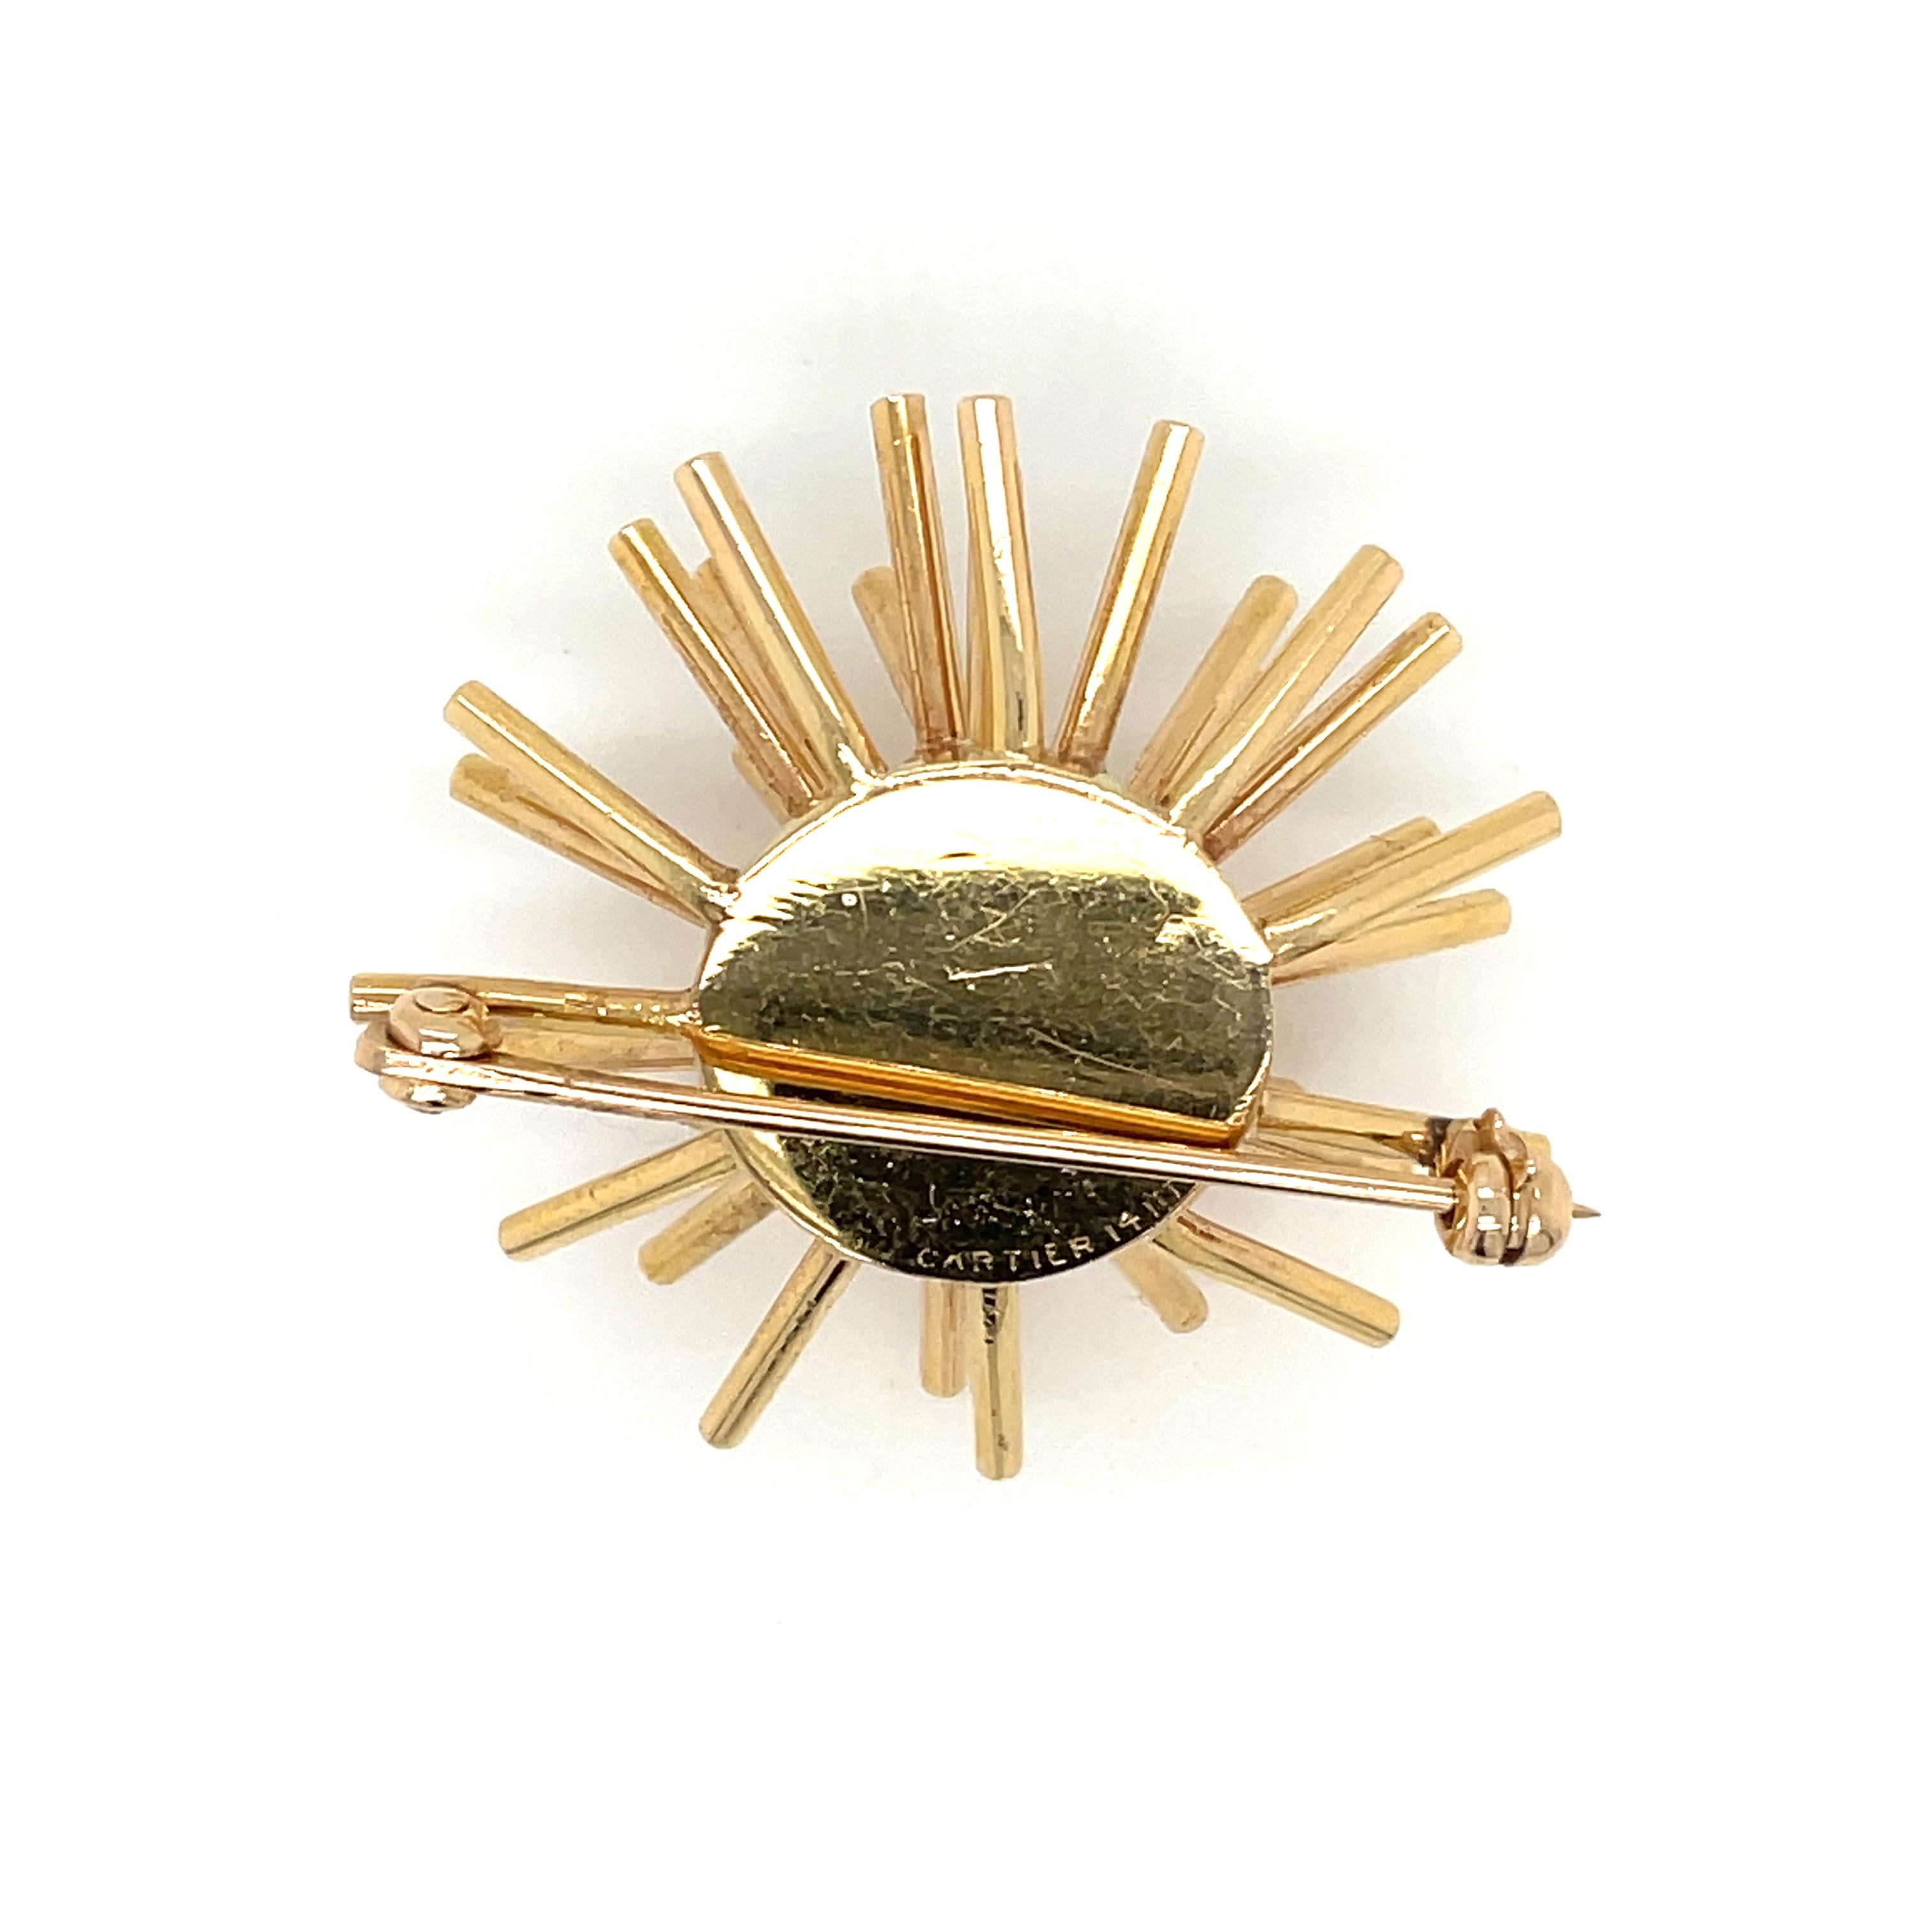 Cartier Sputnik Gold Pin In Excellent Condition For Sale In Napoli, Italy